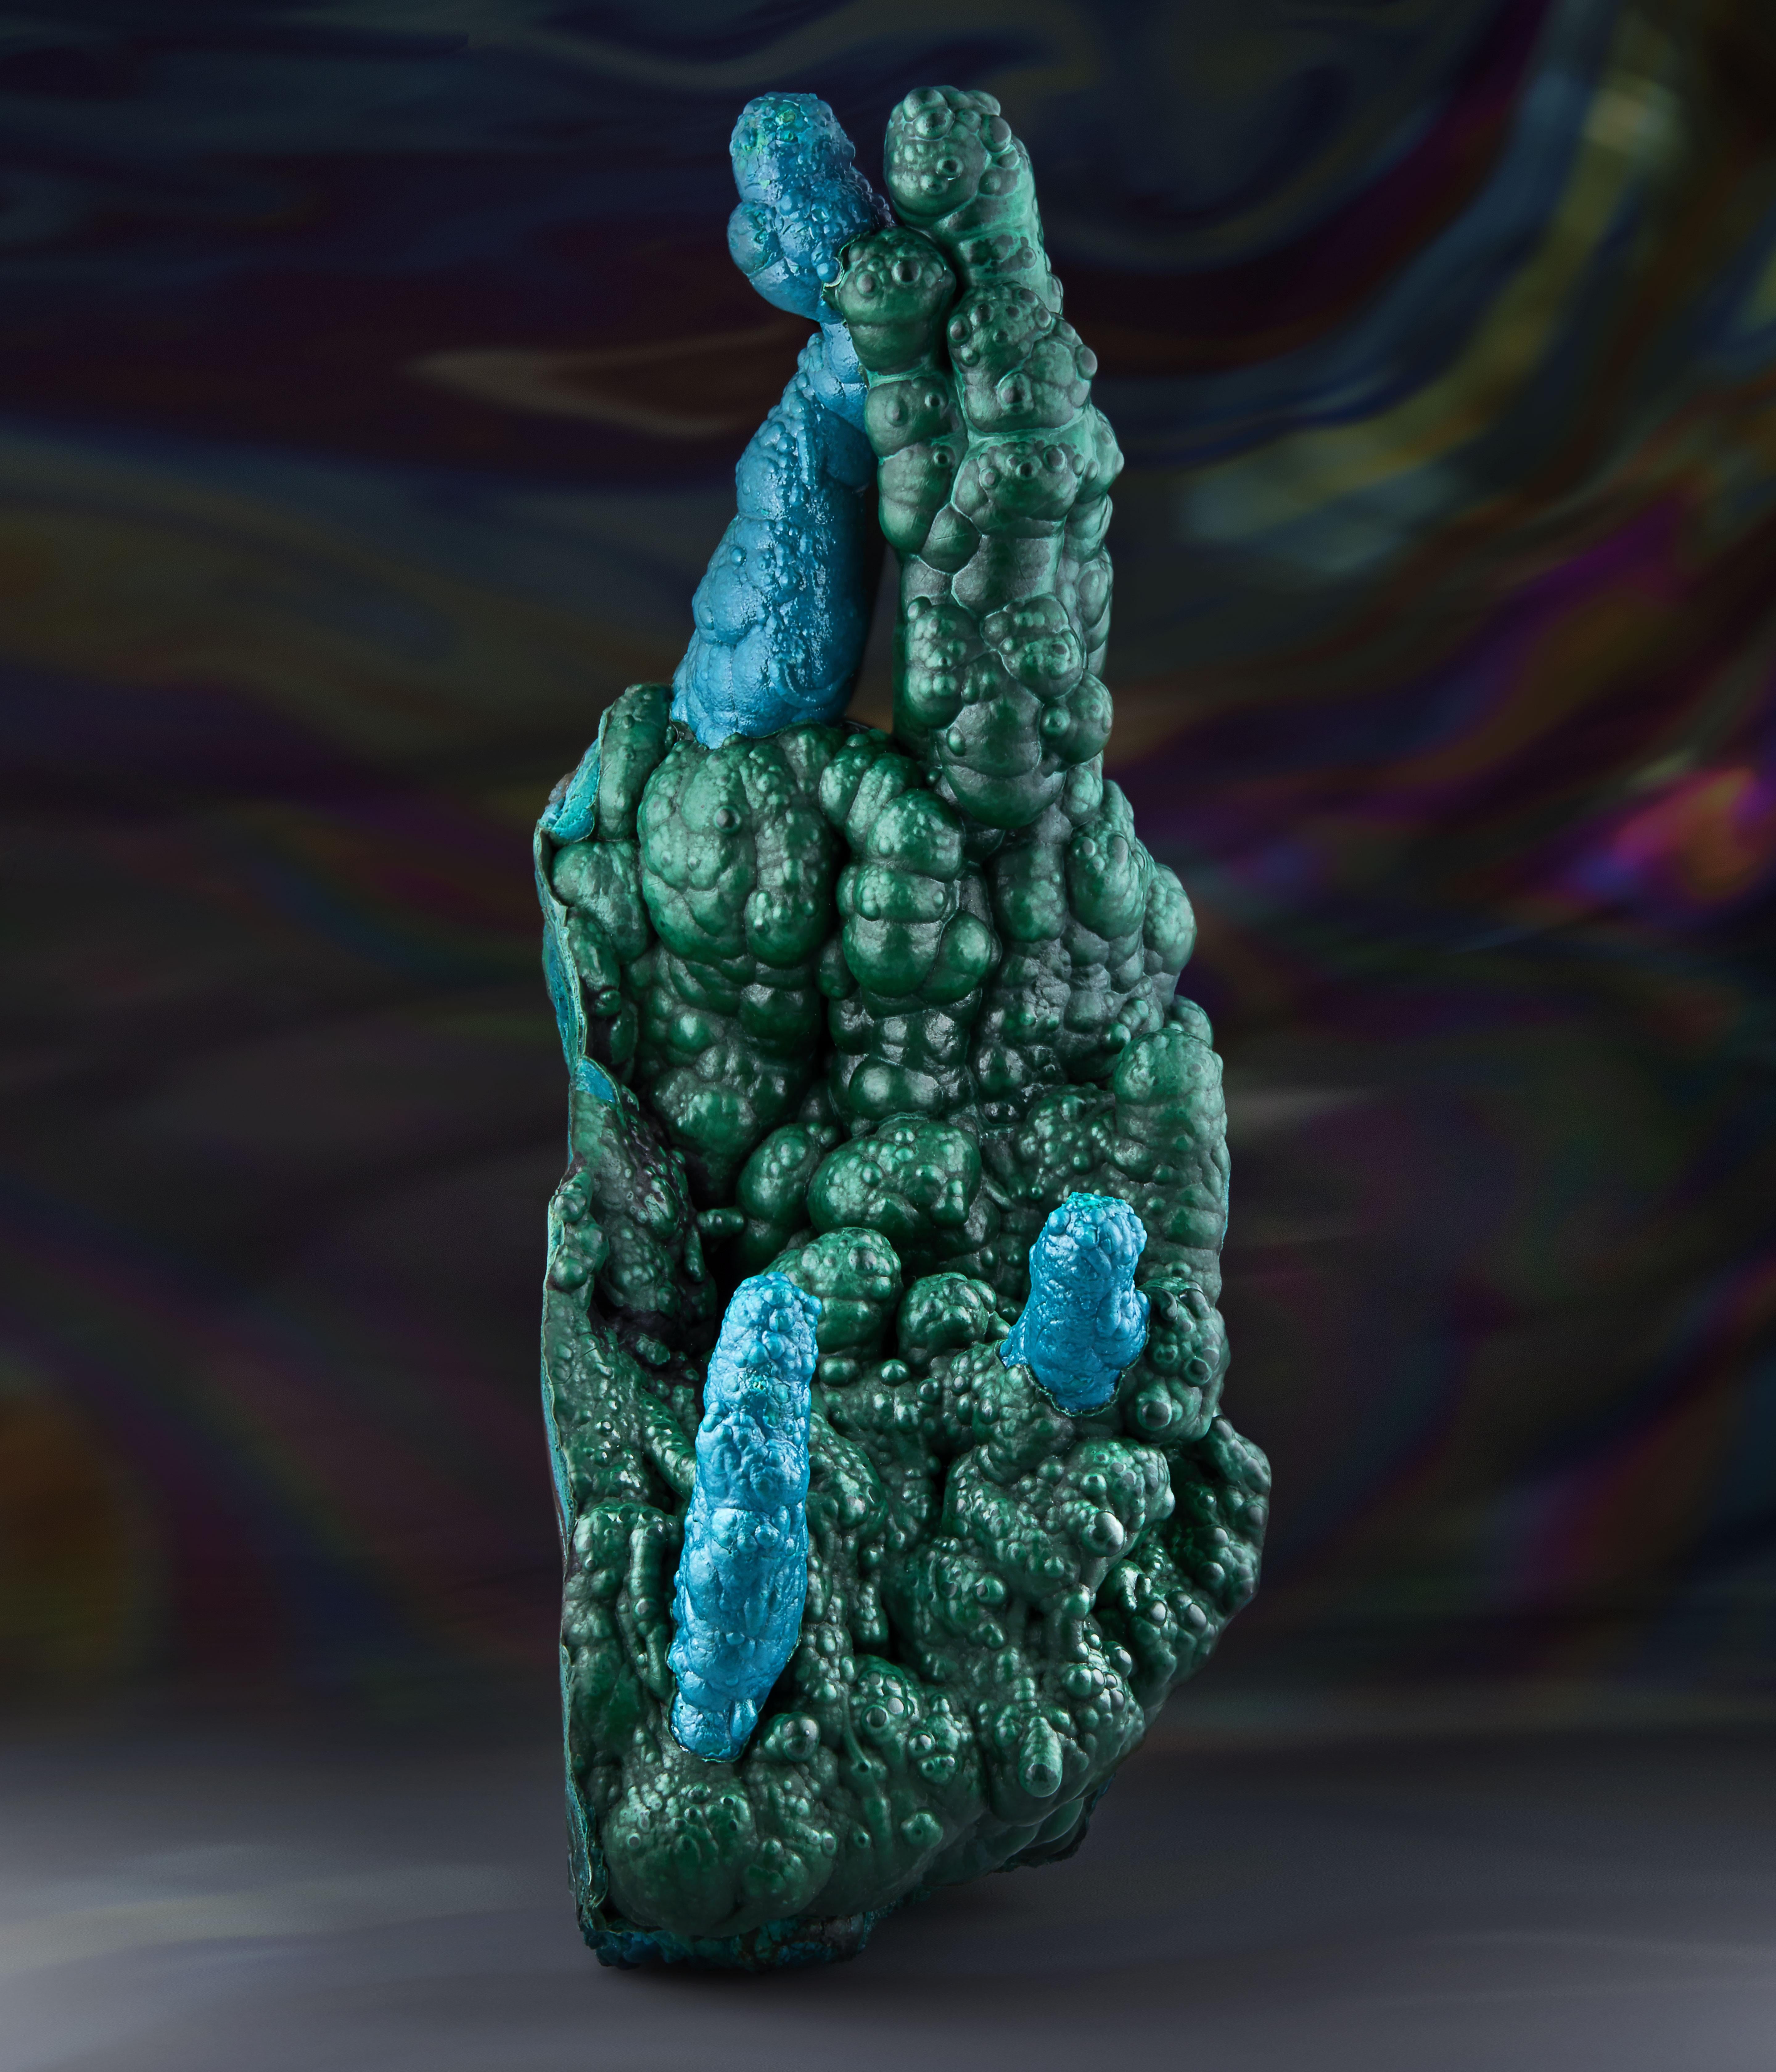 Stalactites of chrysocolla and malachite are highly sought-after. This example is among the finest known. The alternating colors are unique. The bright blue growing parallel with shiny malachite takes this stalactite and places it in a class unto